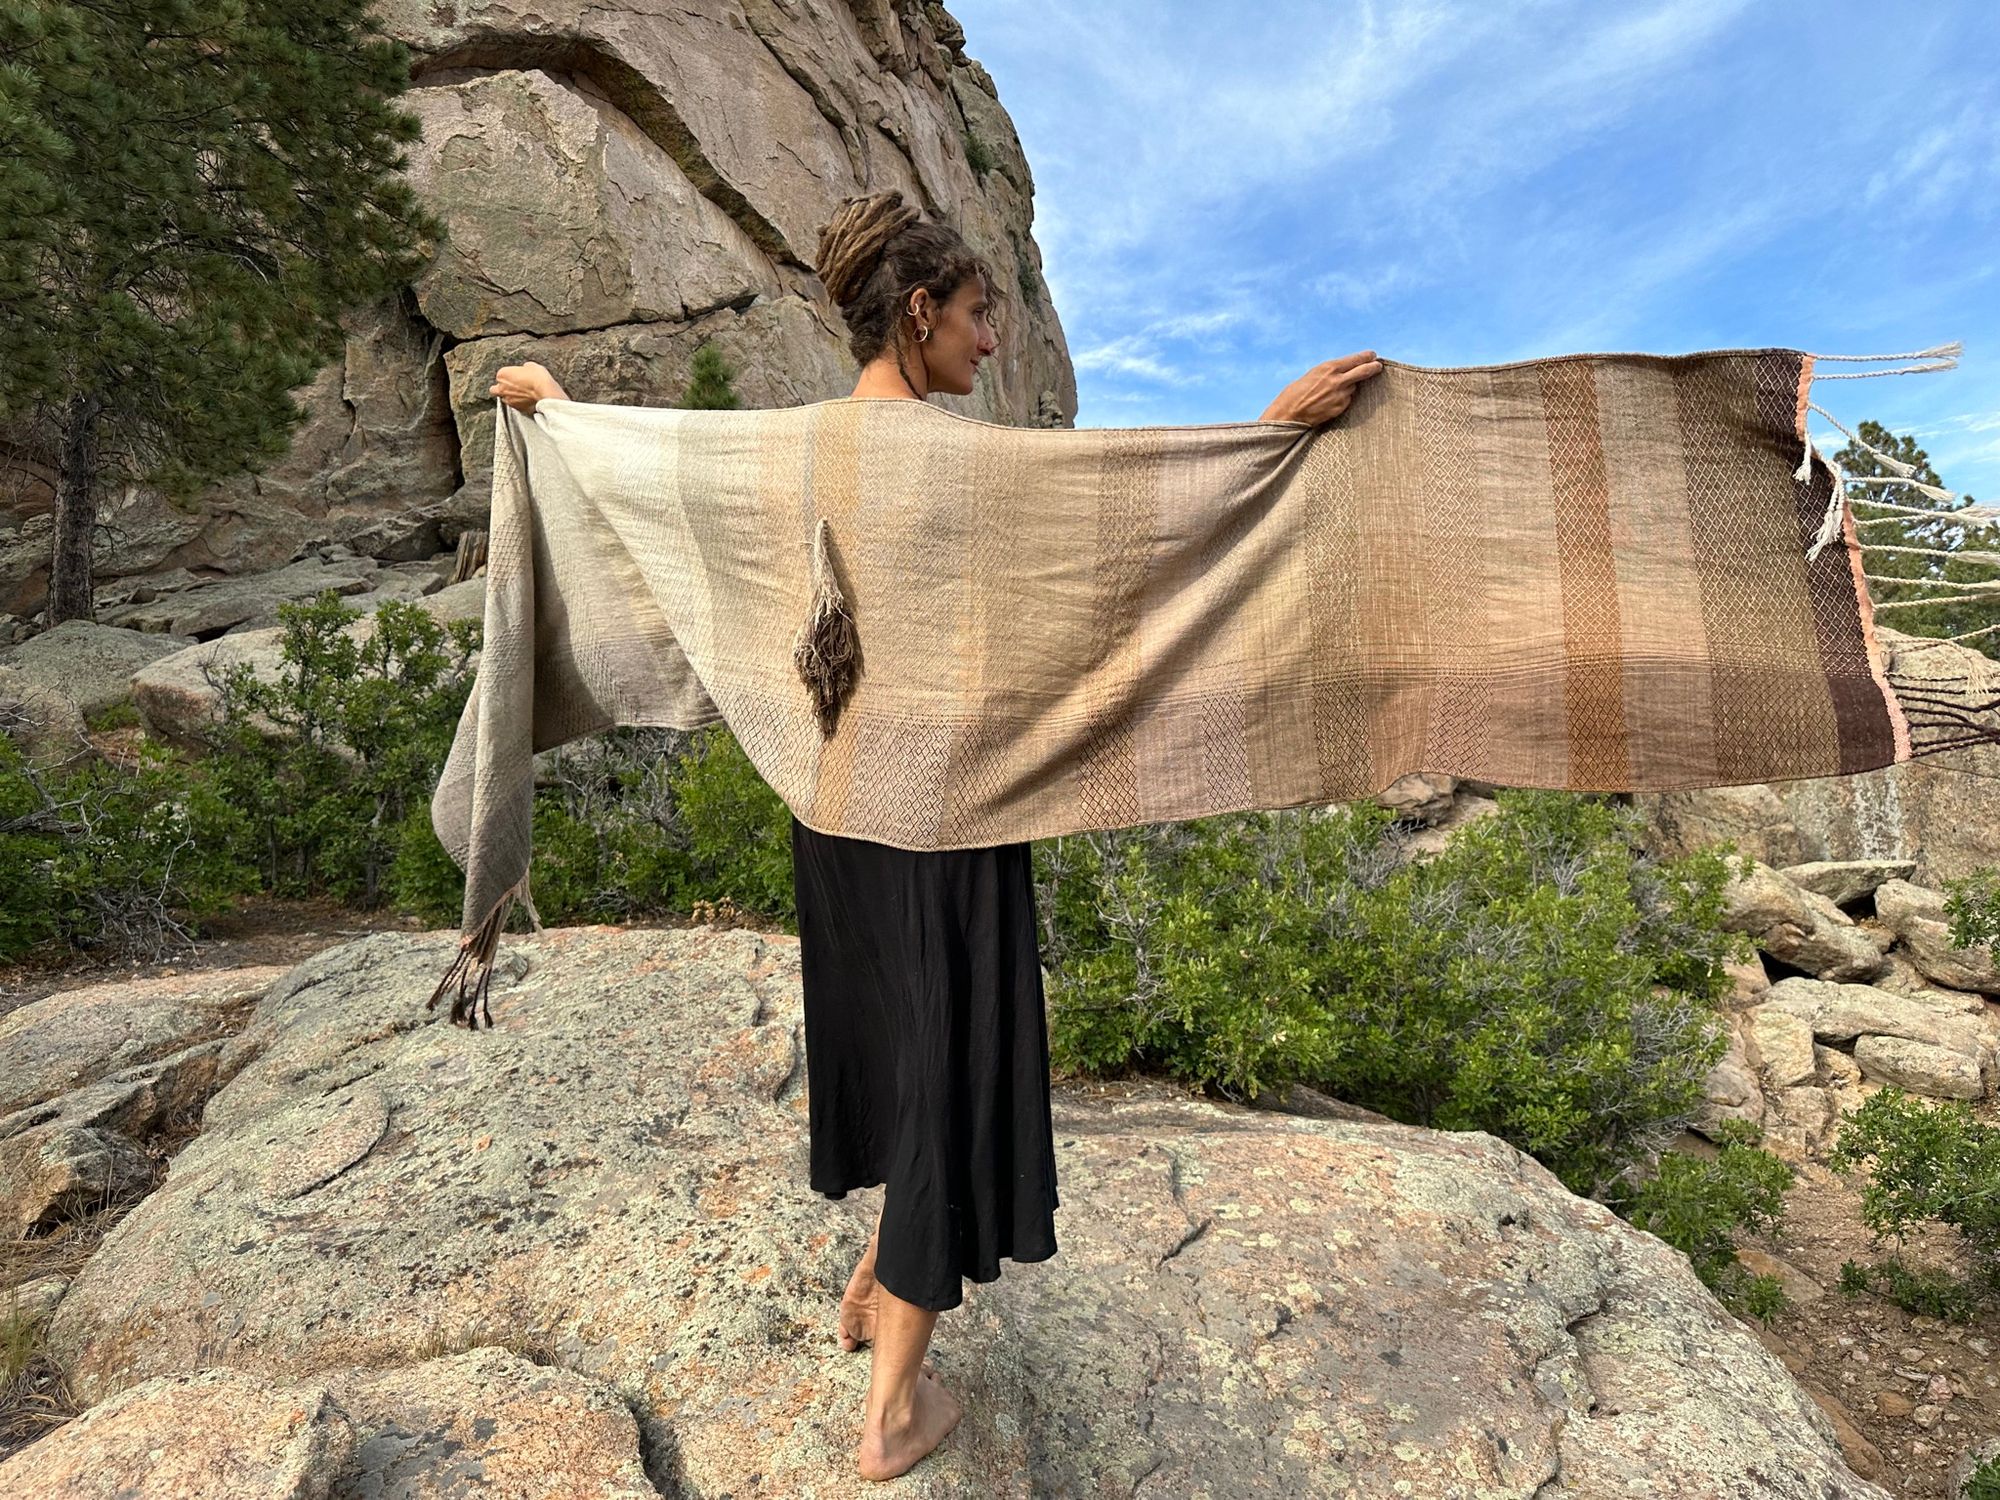 A detail of handwoven softly graded grey to white to brown diamond pattern raw silk fabricA woman in a black dress stands on large rocks wearing a handwoven naturally dyed grey, brown and white shawl